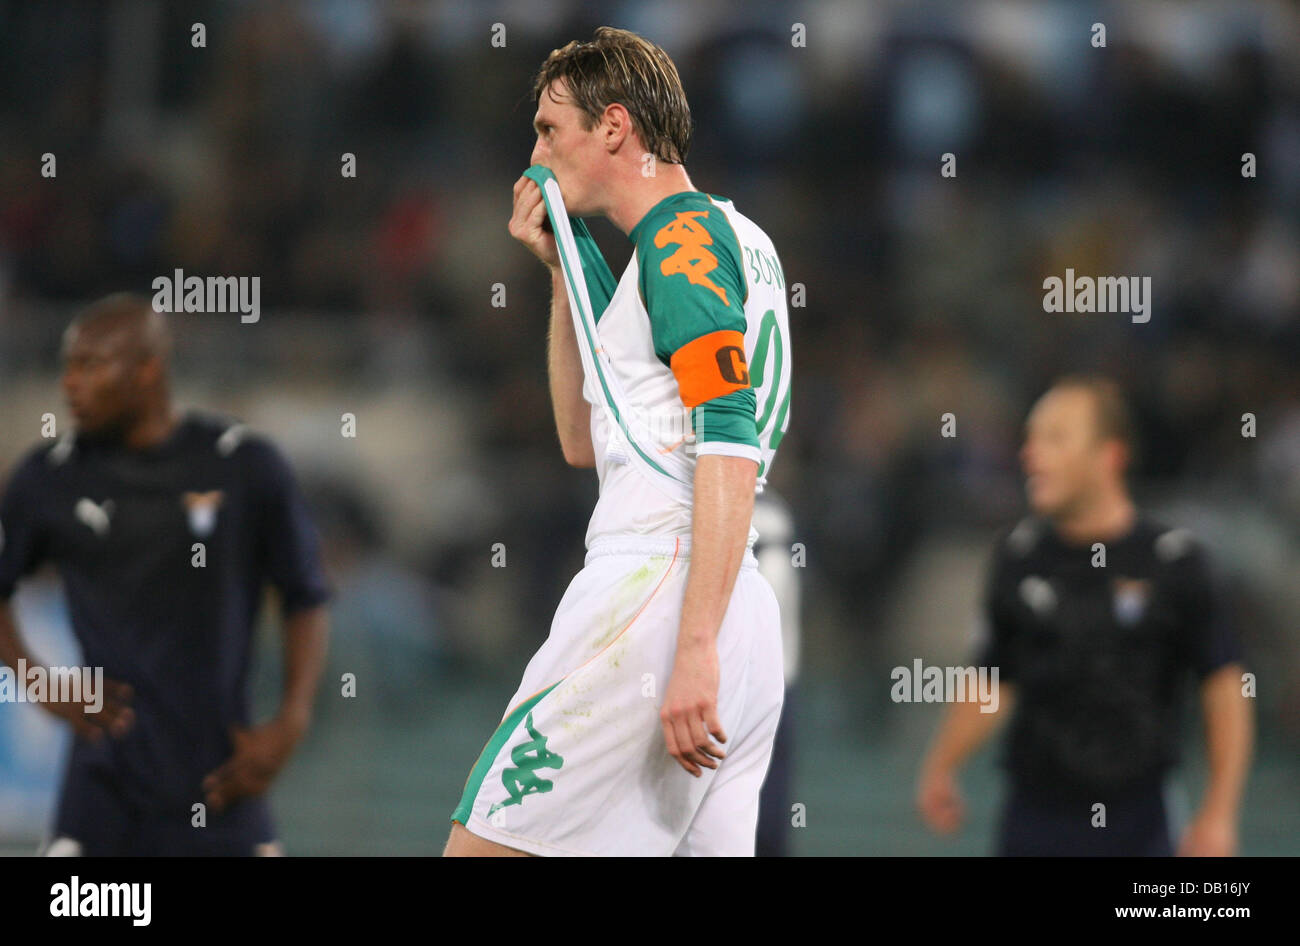 Werder Bremen's Tim Borowski is pictured after a Champions League soccer match against Lazio Rome at Stadio Olimpico in Rome, Italy, 6 November 2007. Werder Bremen lost 2-1. Photo: Carmen Jaspersen Stock Photo